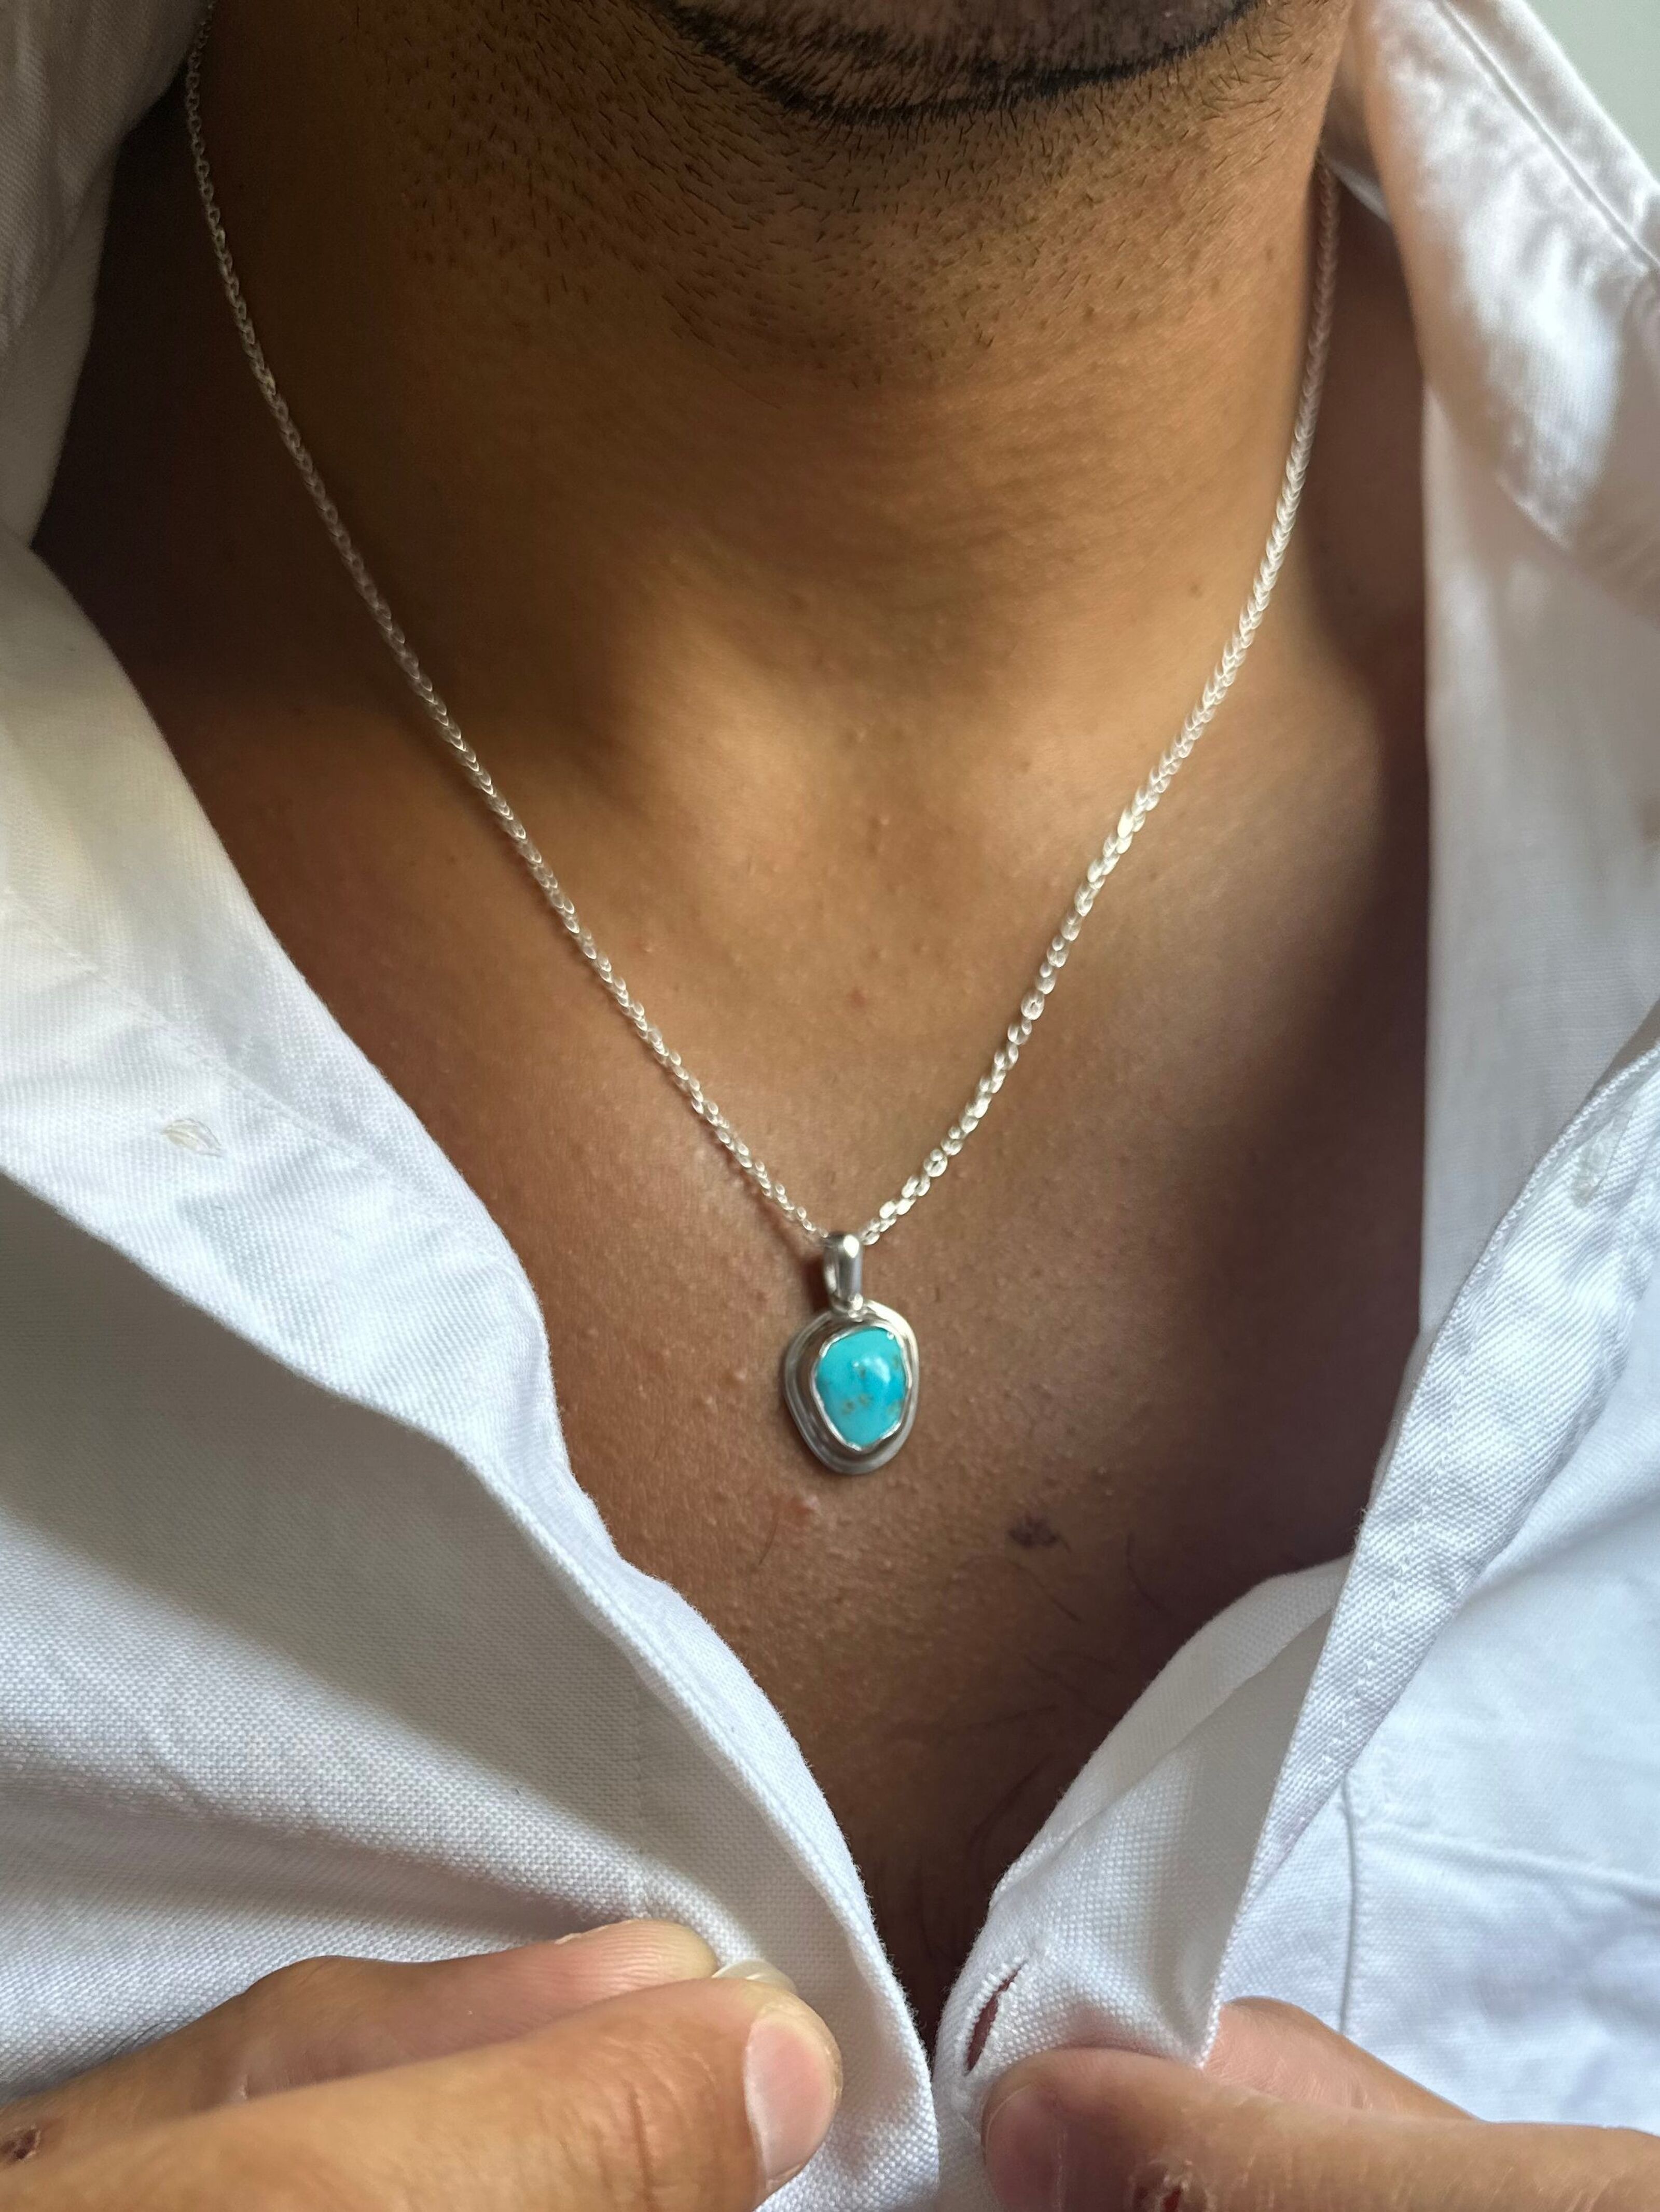 Buy wholesale Sterling Men, Necklace Chain Men, Pendant, Men\'s from SIlver Stone Made Silver Real Necklace, Turquoise Pendant Turquoise